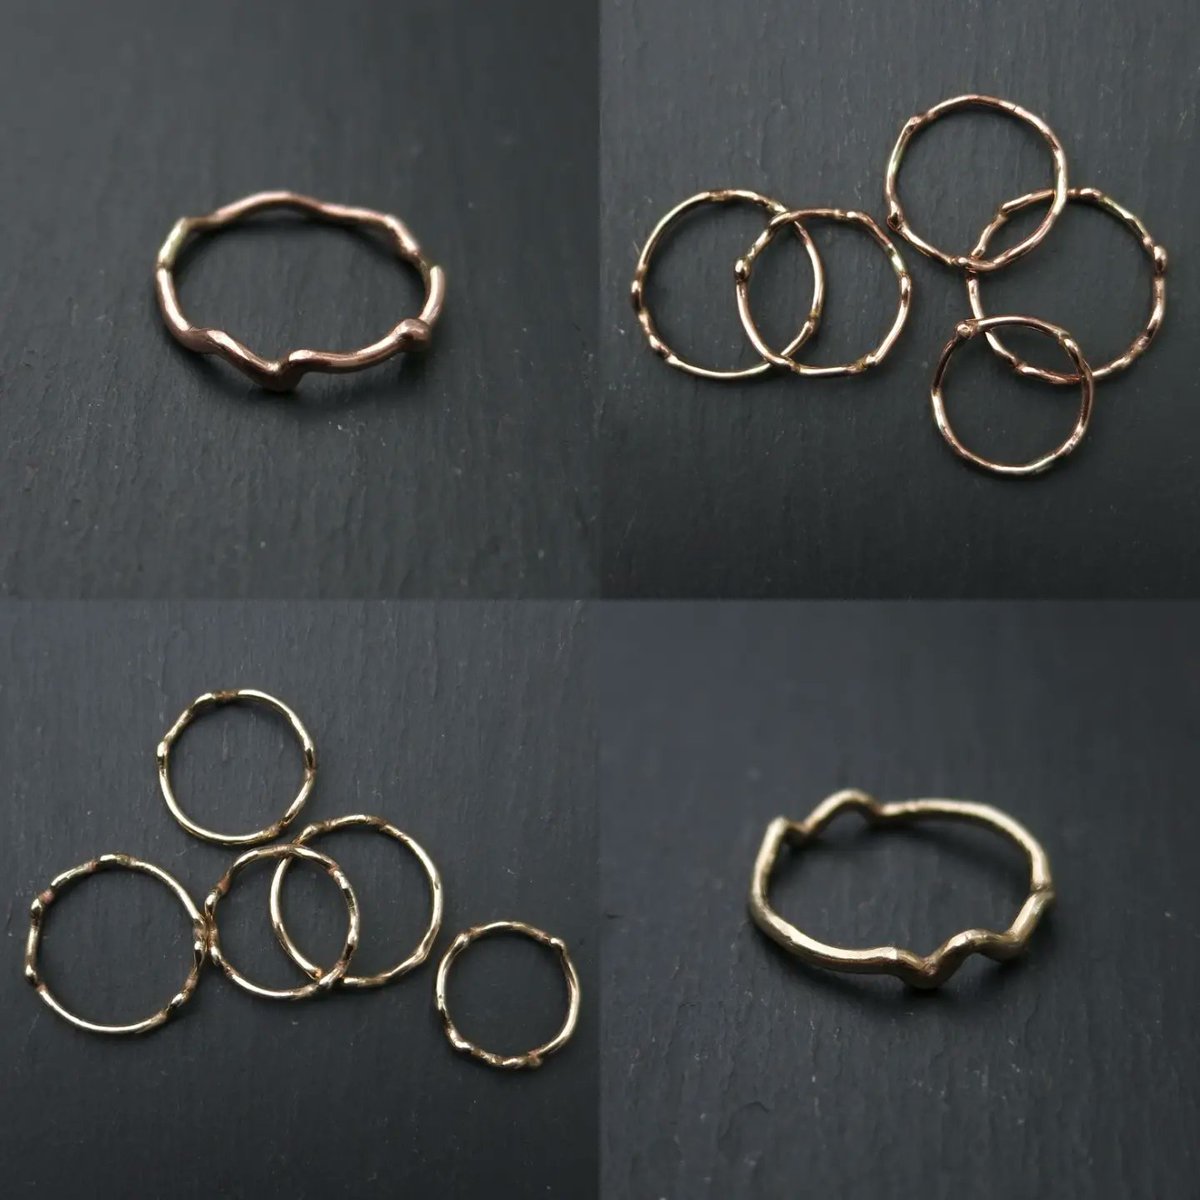 9ct yellow gold and 9ct rose gold Woodland Rings - now available on my website💛 
#9ct #9ctgold #rosegold #yellowgold #gold #goldrings #handmadegoldrings #handmaderings
#uniquerings #twistedwillow #wigglyrings #unique #woodlandrings #lymeregis #Dorset #dorsetmaker #ilovenature